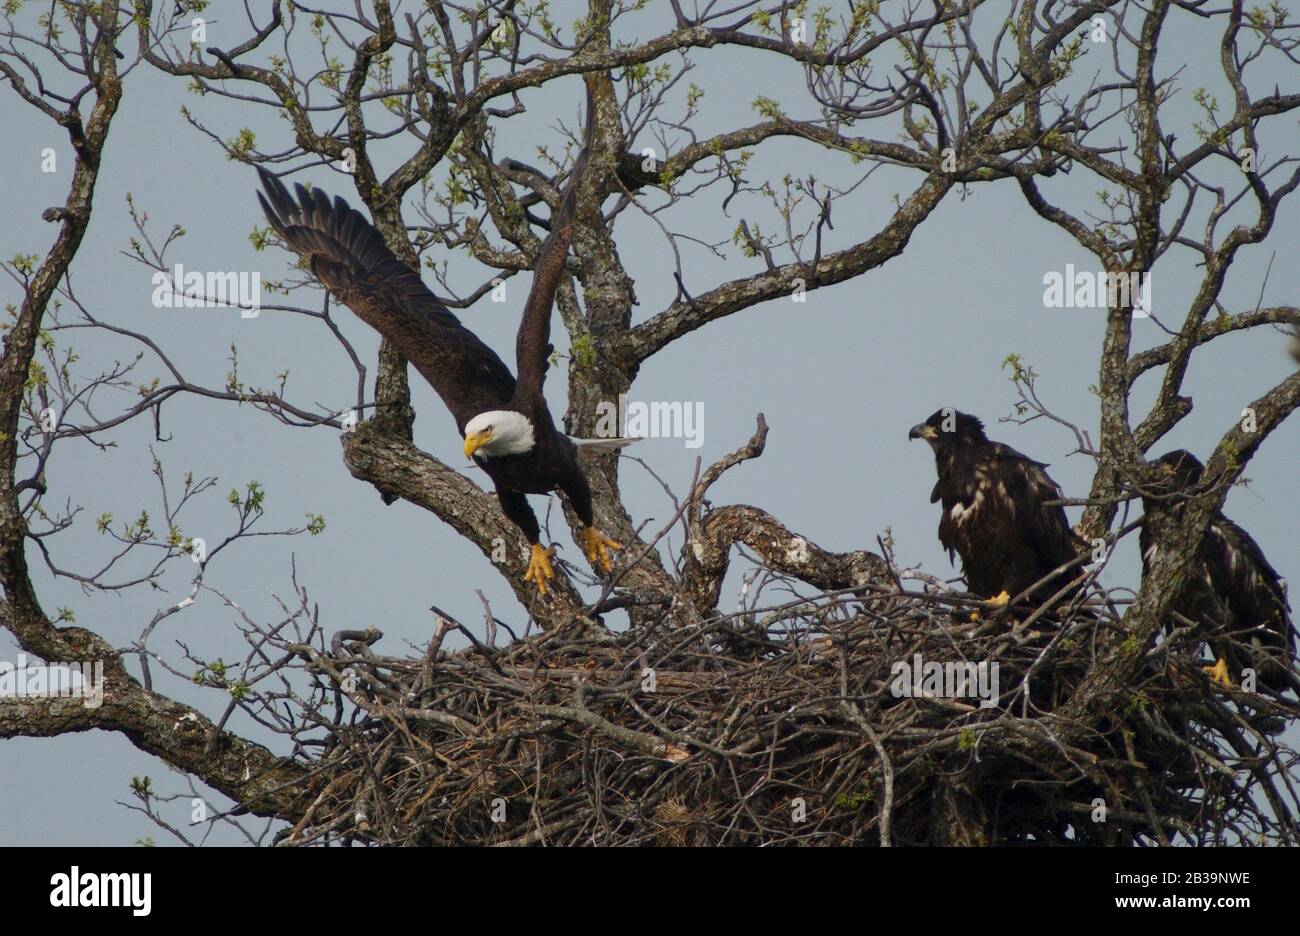 Llano County Texas USA, April 4, 2004: An American bald eagle takes off as its two immature offspring perch on a limb overlooking the Llano River in central Texas about 120 yards from a major highway. ©Bob Daemmrich Stock Photo